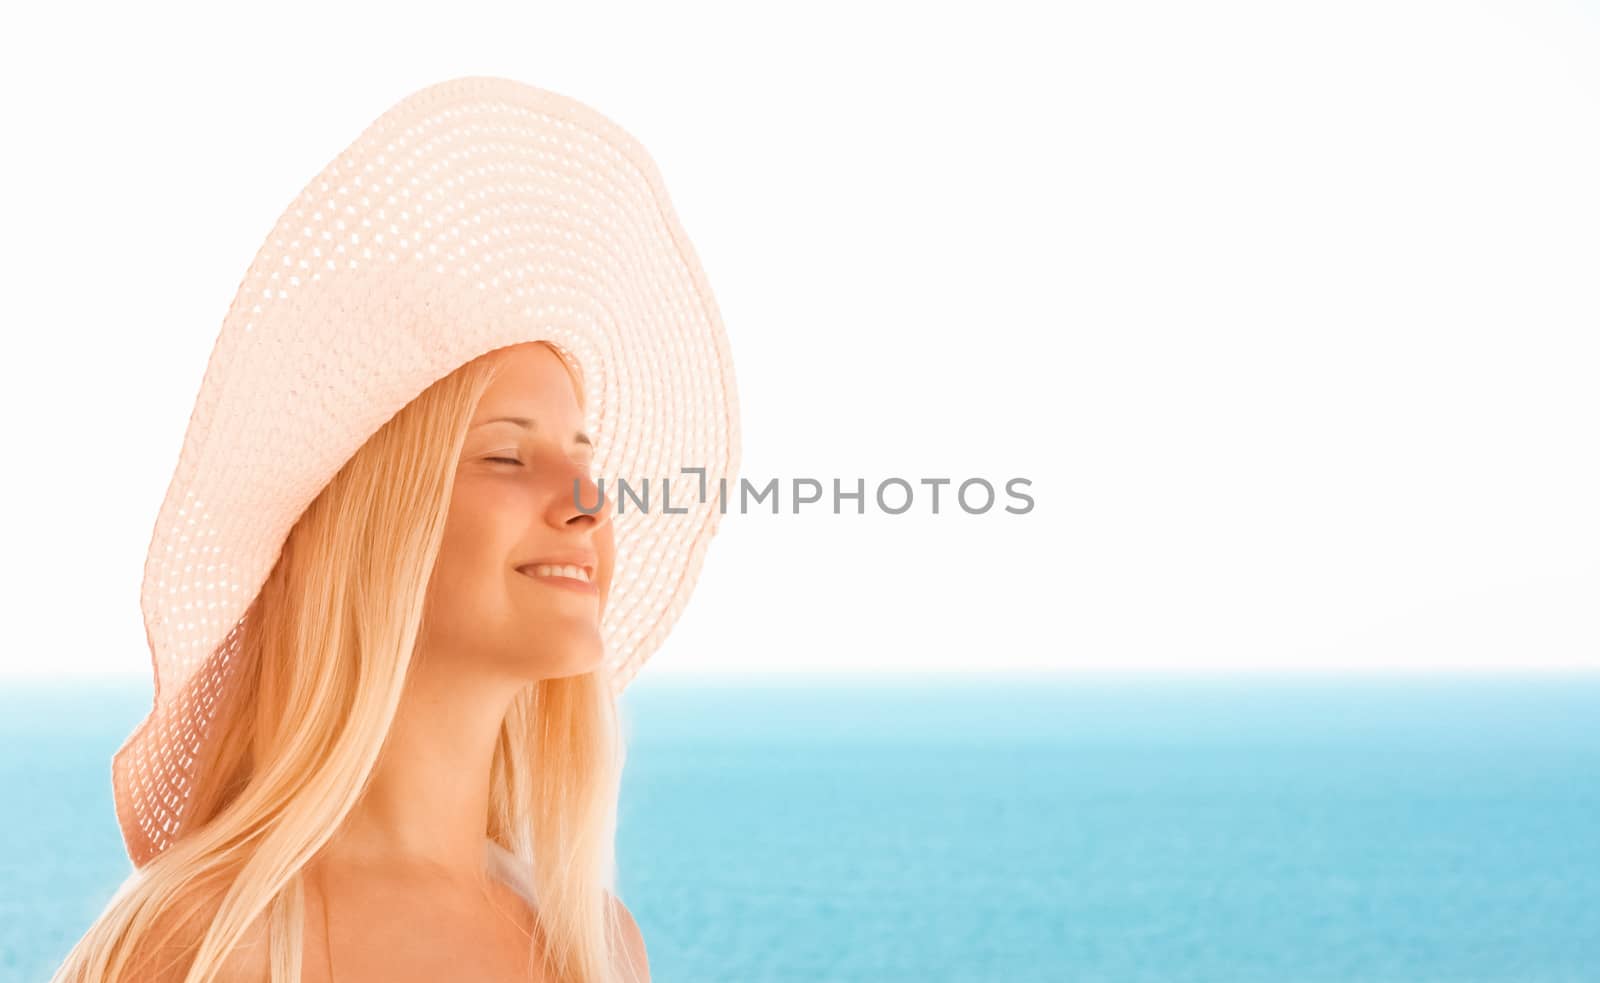 Woman with blond hair wearing hat, enjoying seaside and beach lifestyle in summertime, holiday travel and leisure concept